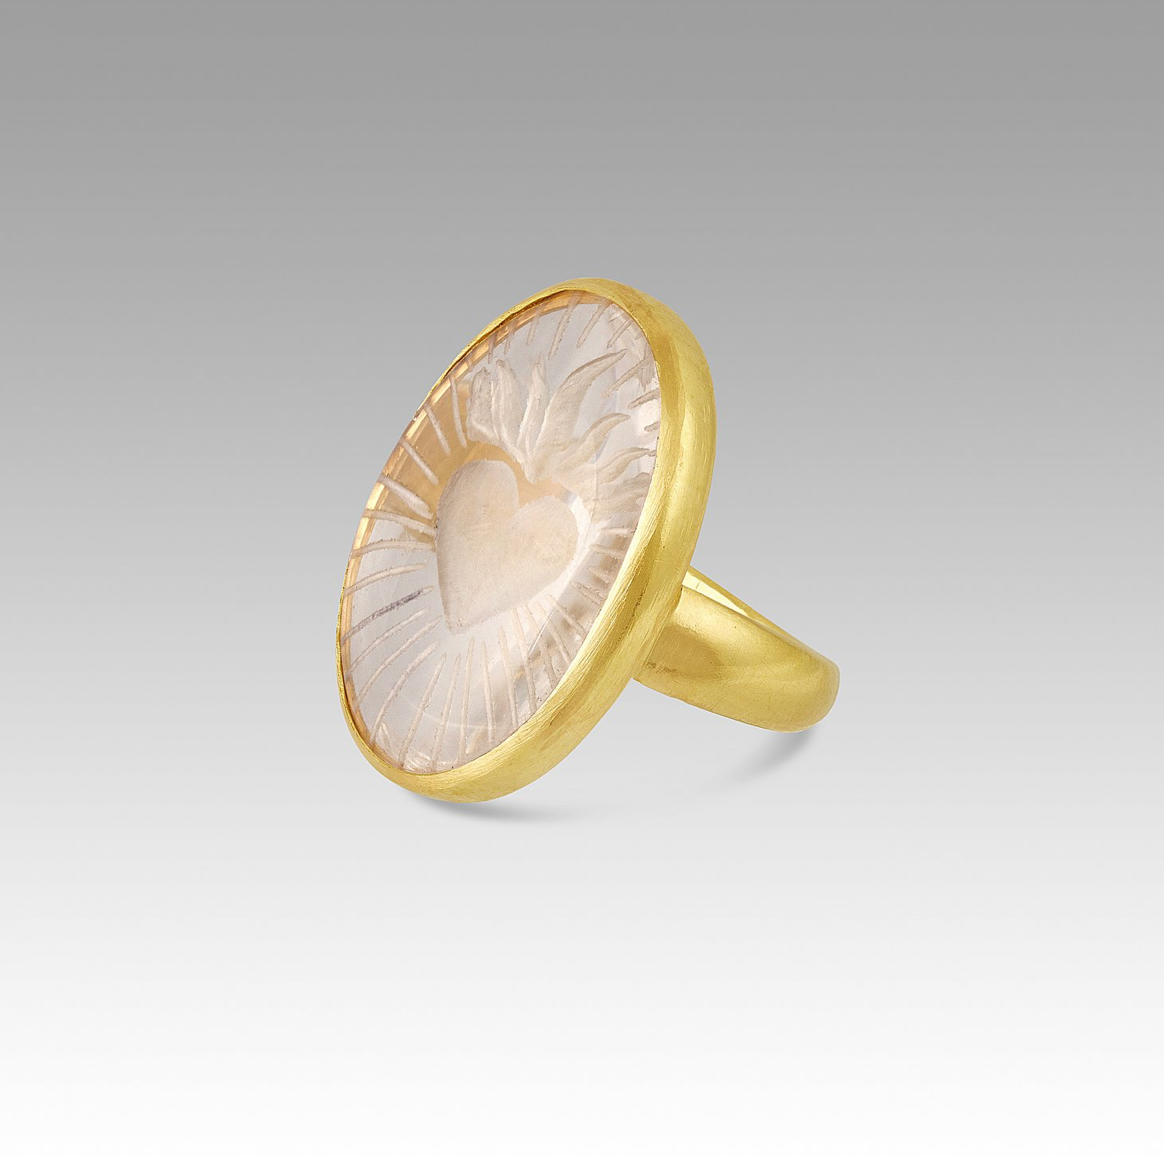 Hetre Alresford Hampshire Jewellery Sophie Theakston Flaming Carved Heart Ring 